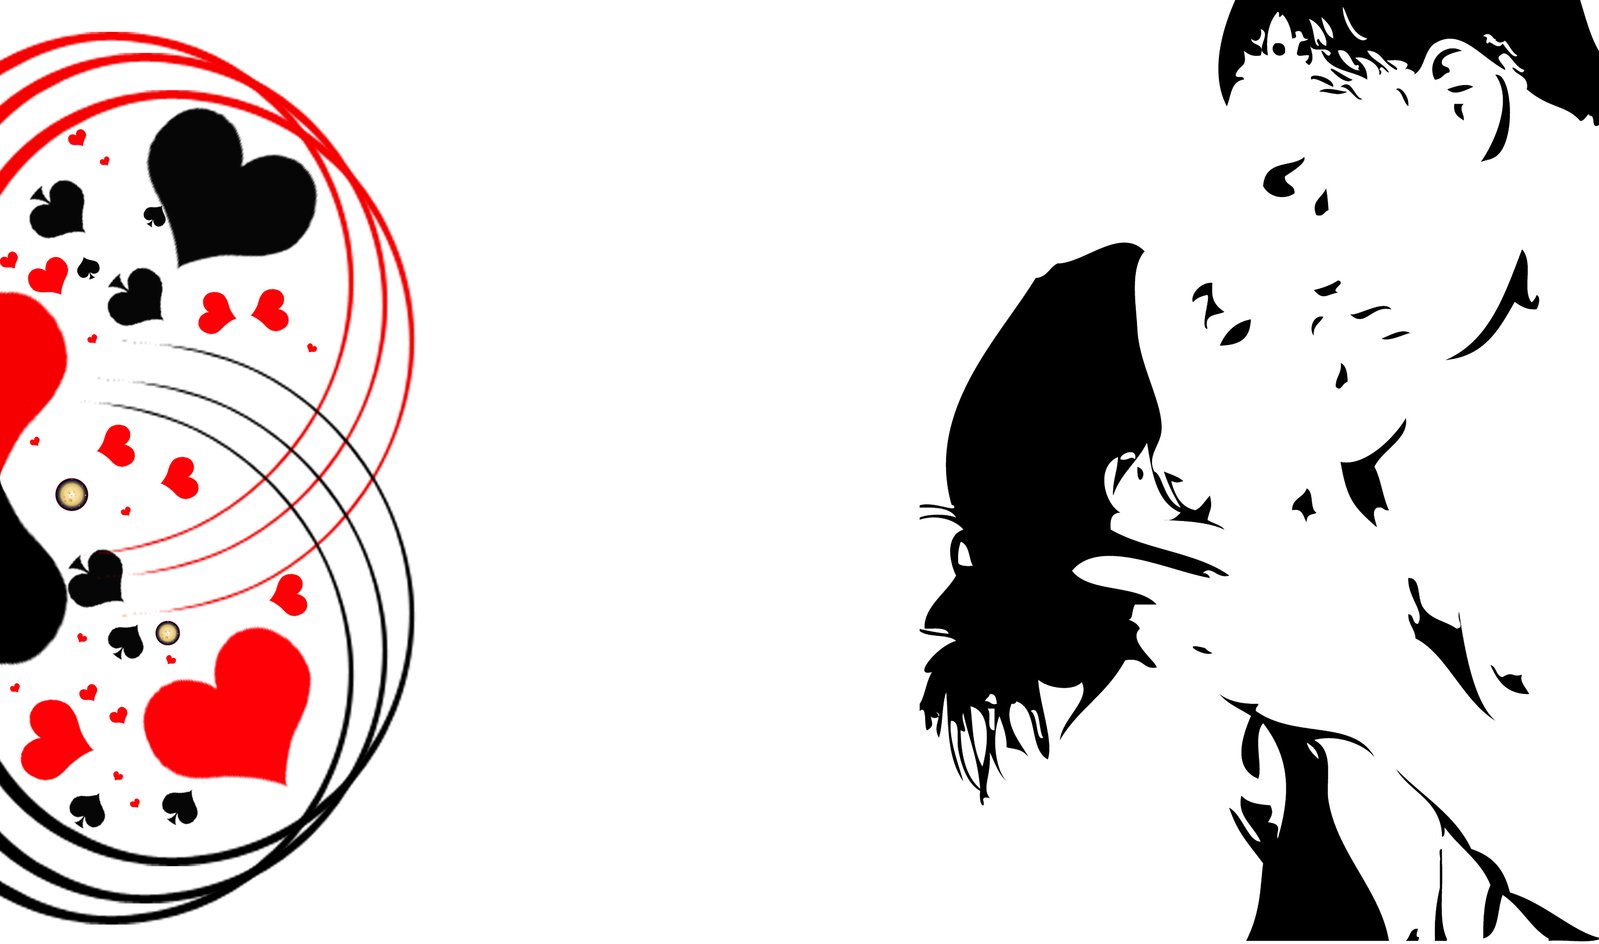 an abstract red and black design of people holding each other